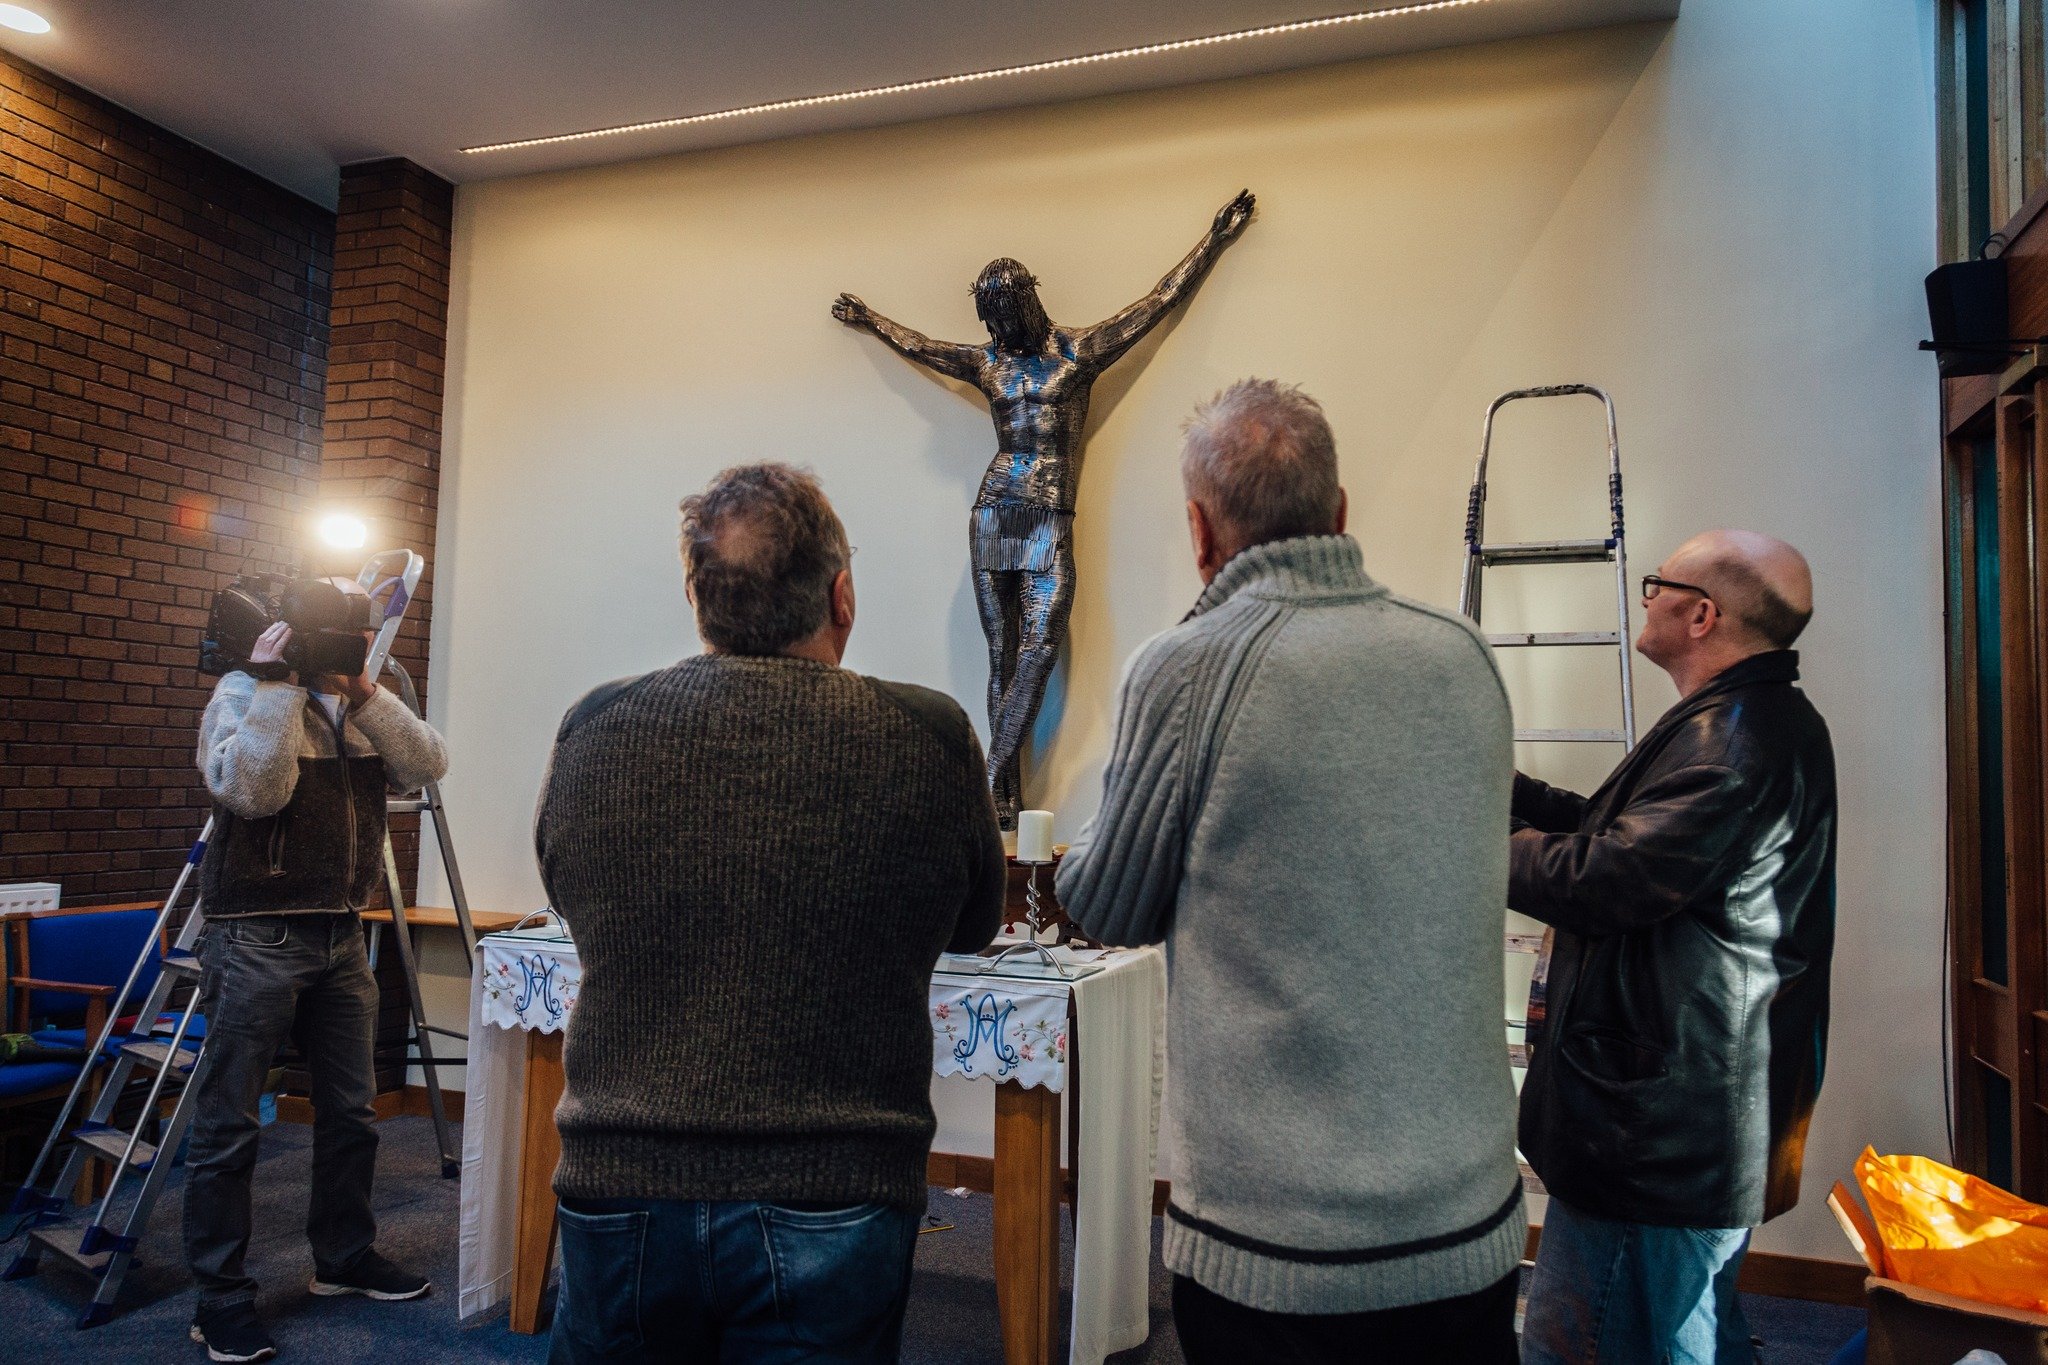 The Sorrows of Steel: a life-size portrayal of Jesus Christ, meticulously fashioned from more than 15,000 welded nails. Shaun Gagg's masterpiece reveres Salvador Dali's 'Christ of Saint John of the Cross', seamlessly blending artistic ingenuity with 